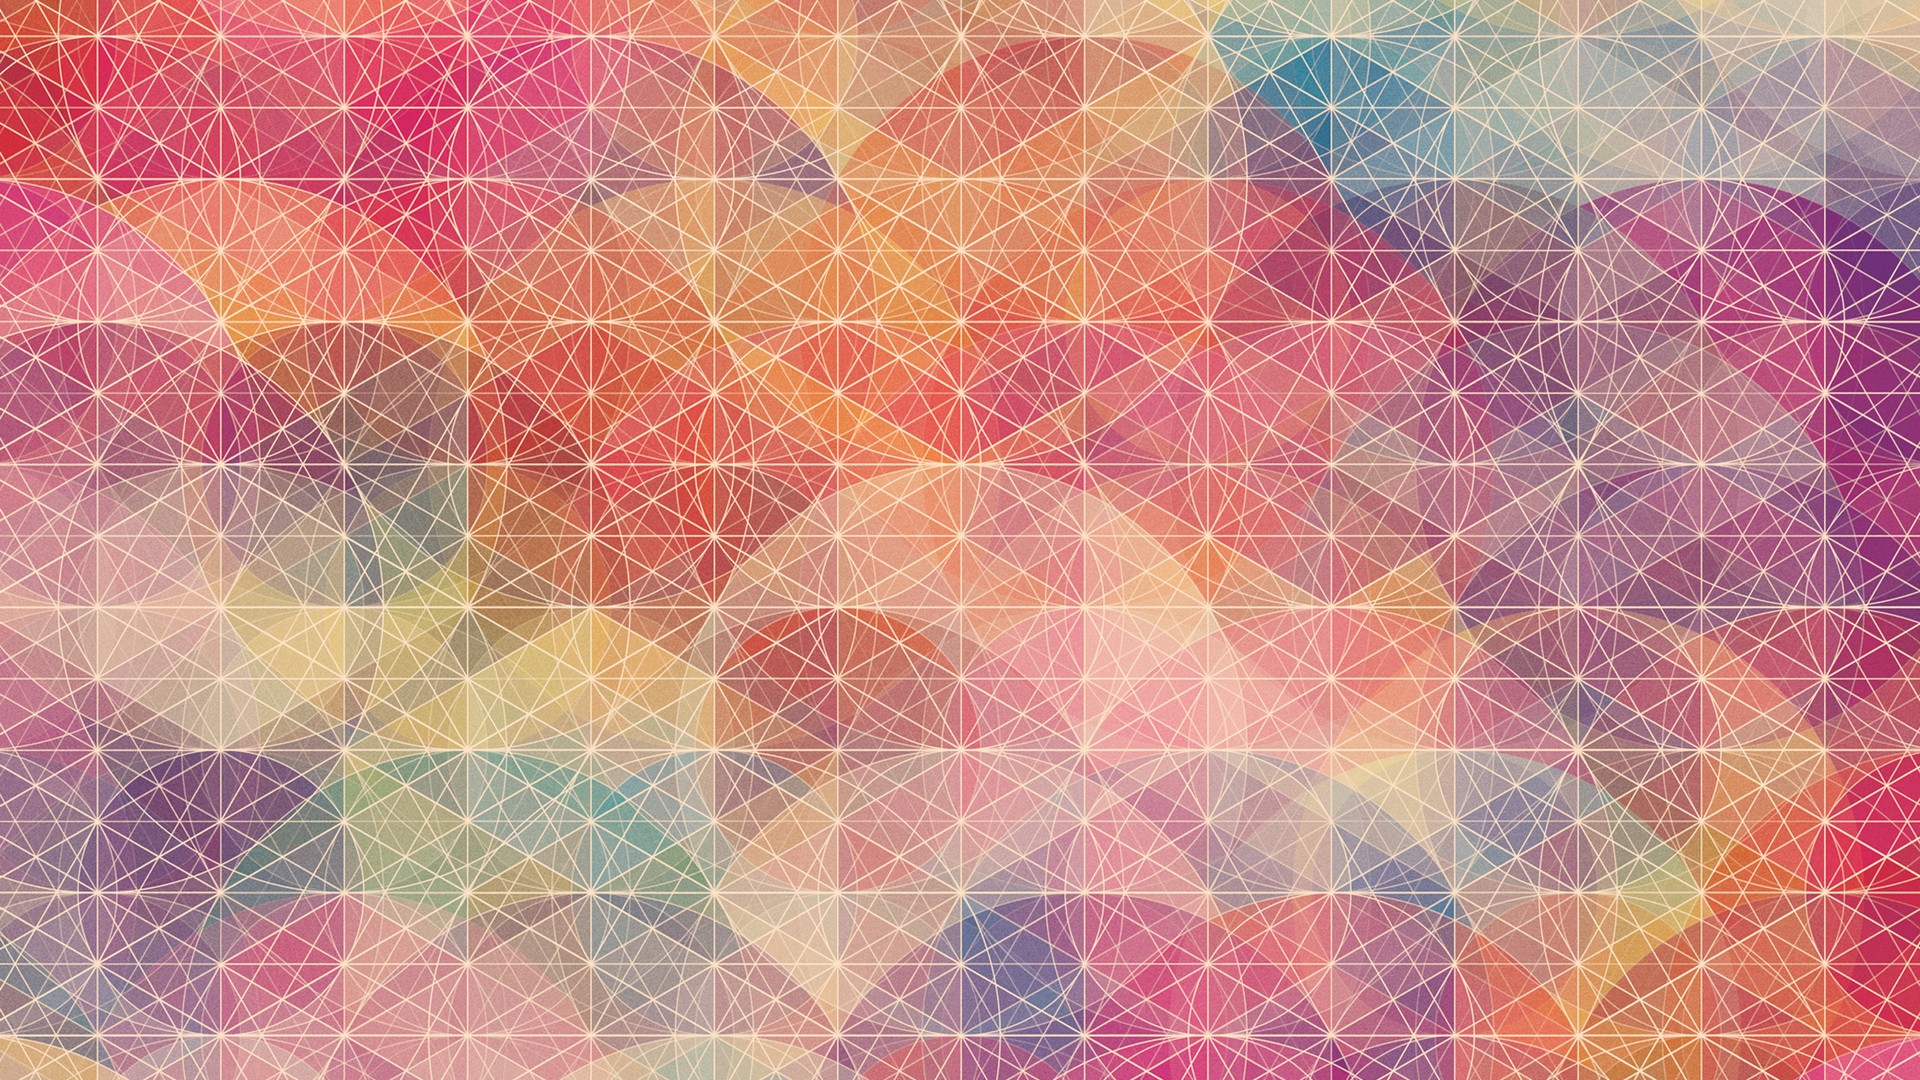 Geometric Wallpaper For Desktop with high-resolution 1920x1080 pixel. You can use this wallpaper for your Windows and Mac OS computers as well as your Android and iPhone smartphones